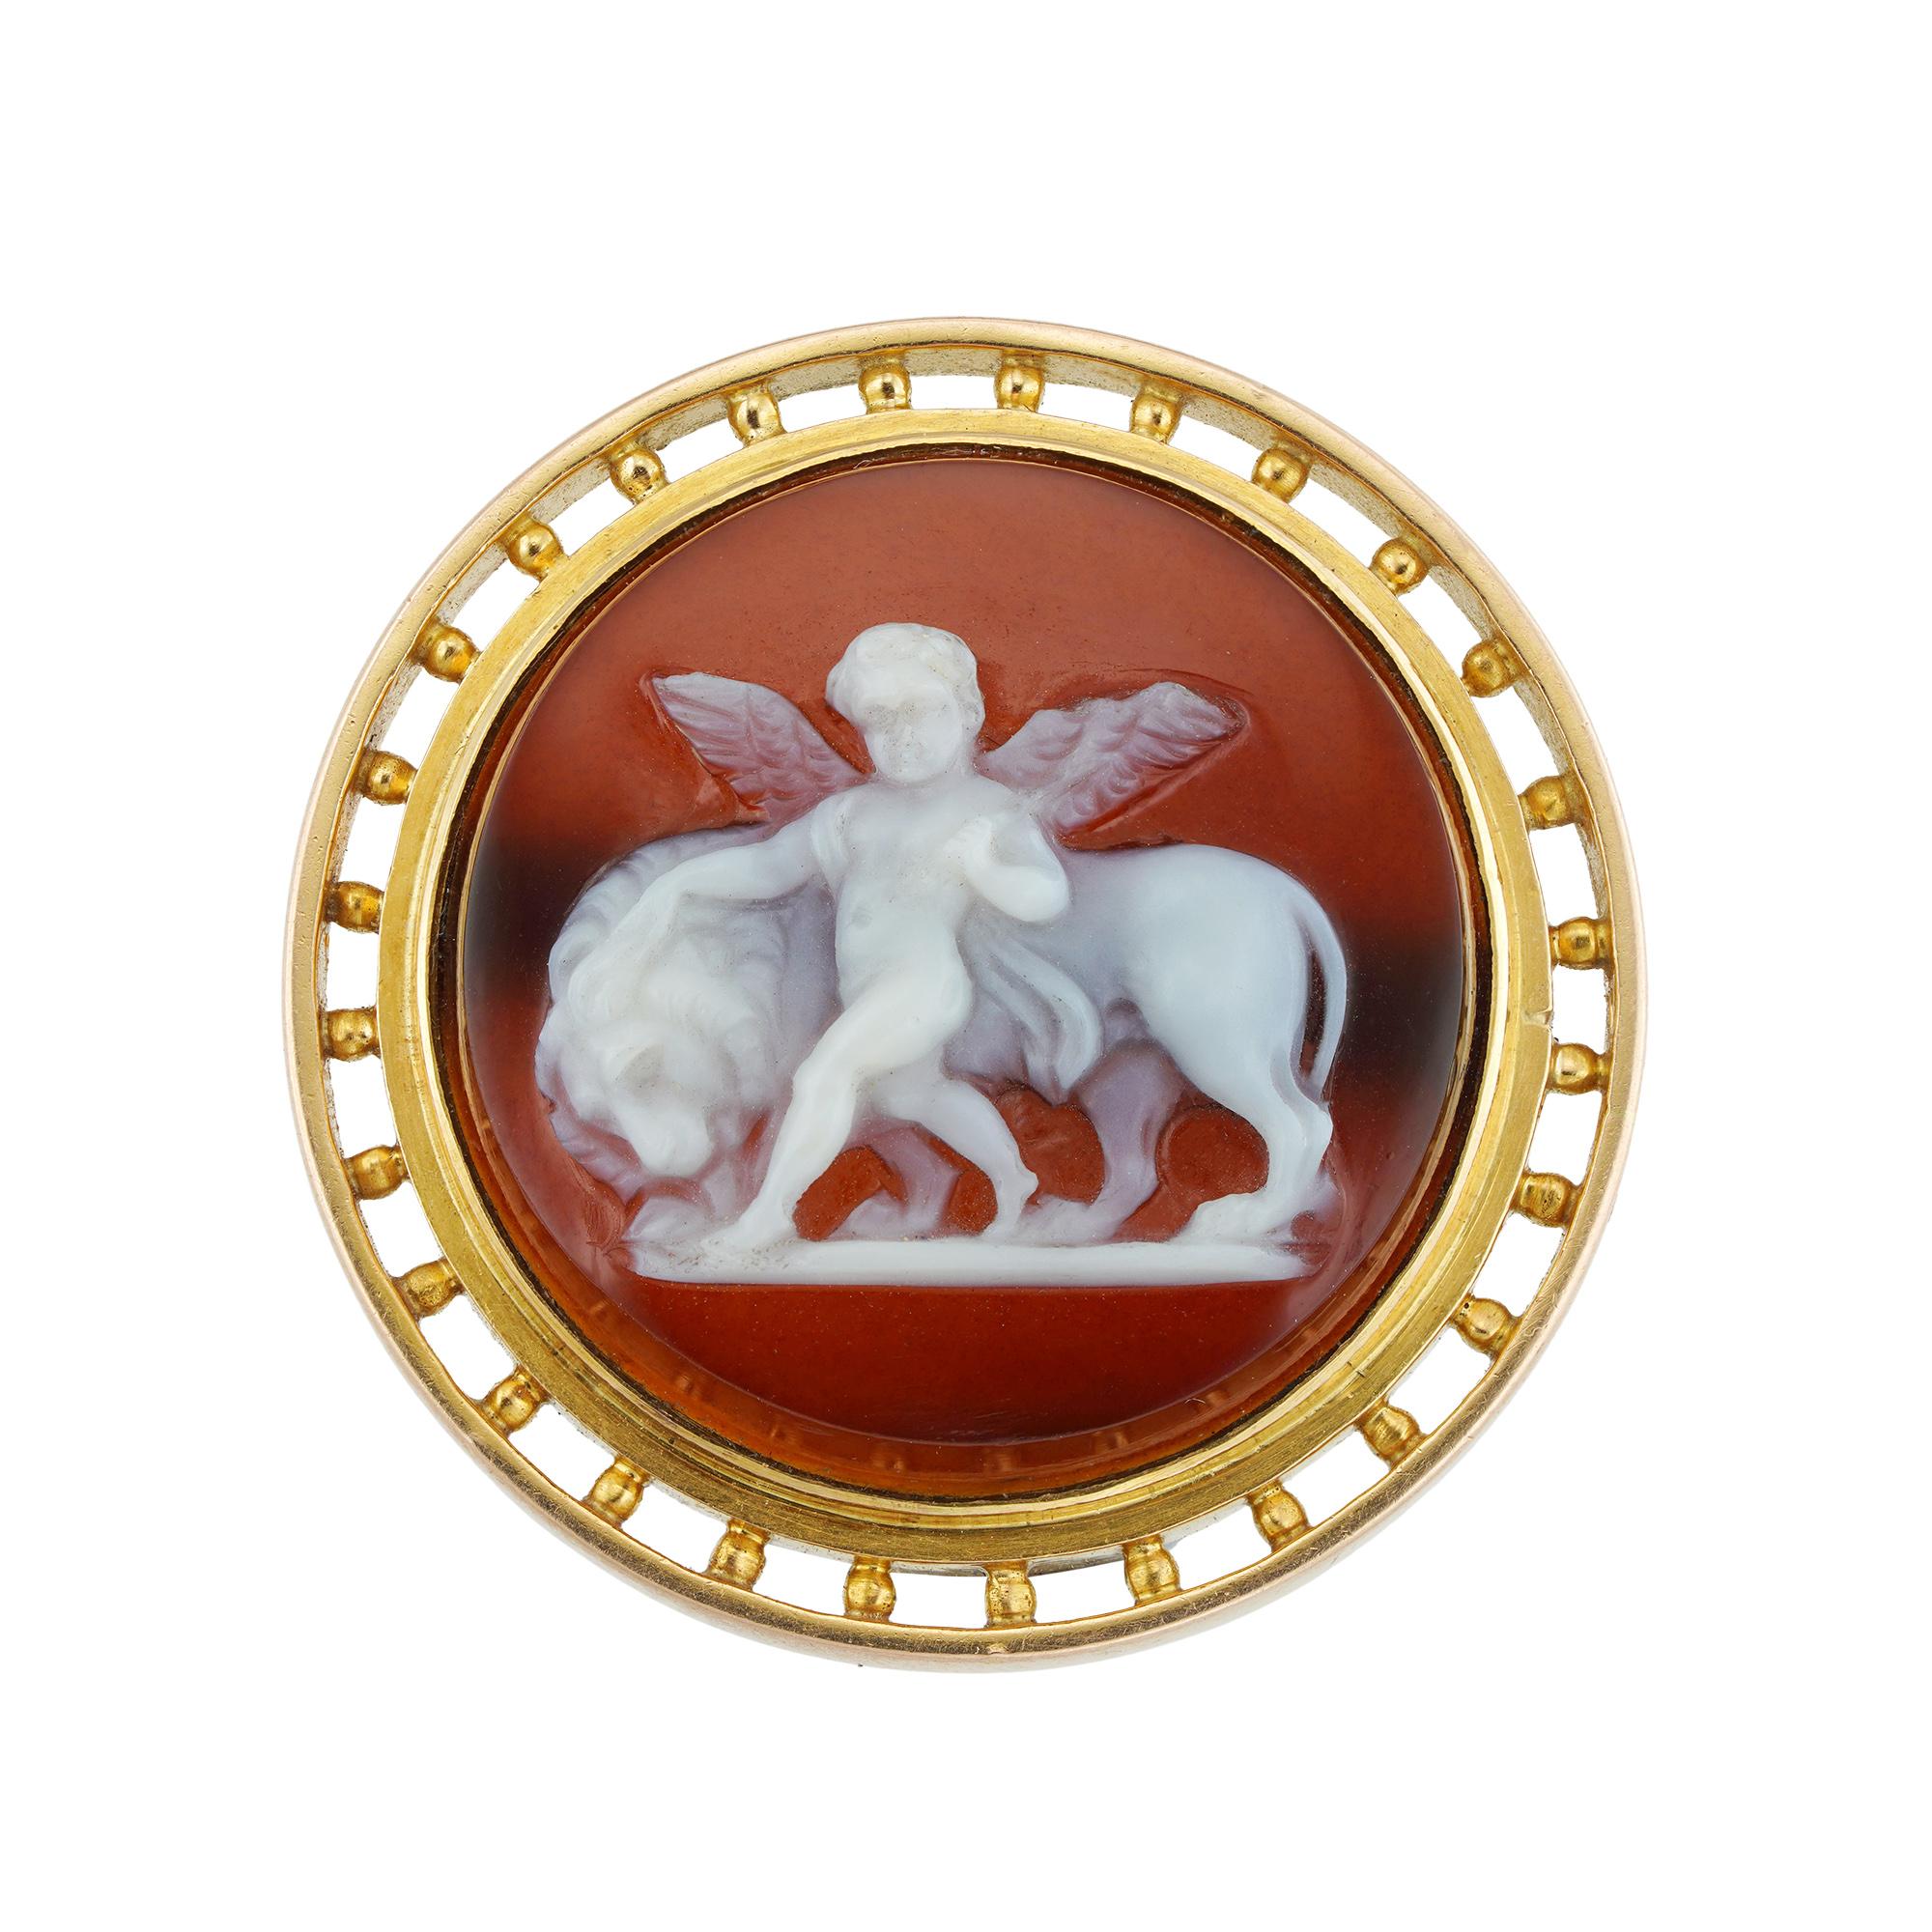 A Victorian carved hardstone cameo brooch, the circular carved hardstone depicting Eros accompanied by a lion, surrounded by yellow gold frame with beaded openwork border, circa 1870, measuring approximately 2.7cm in diameter, gross weight 9.2